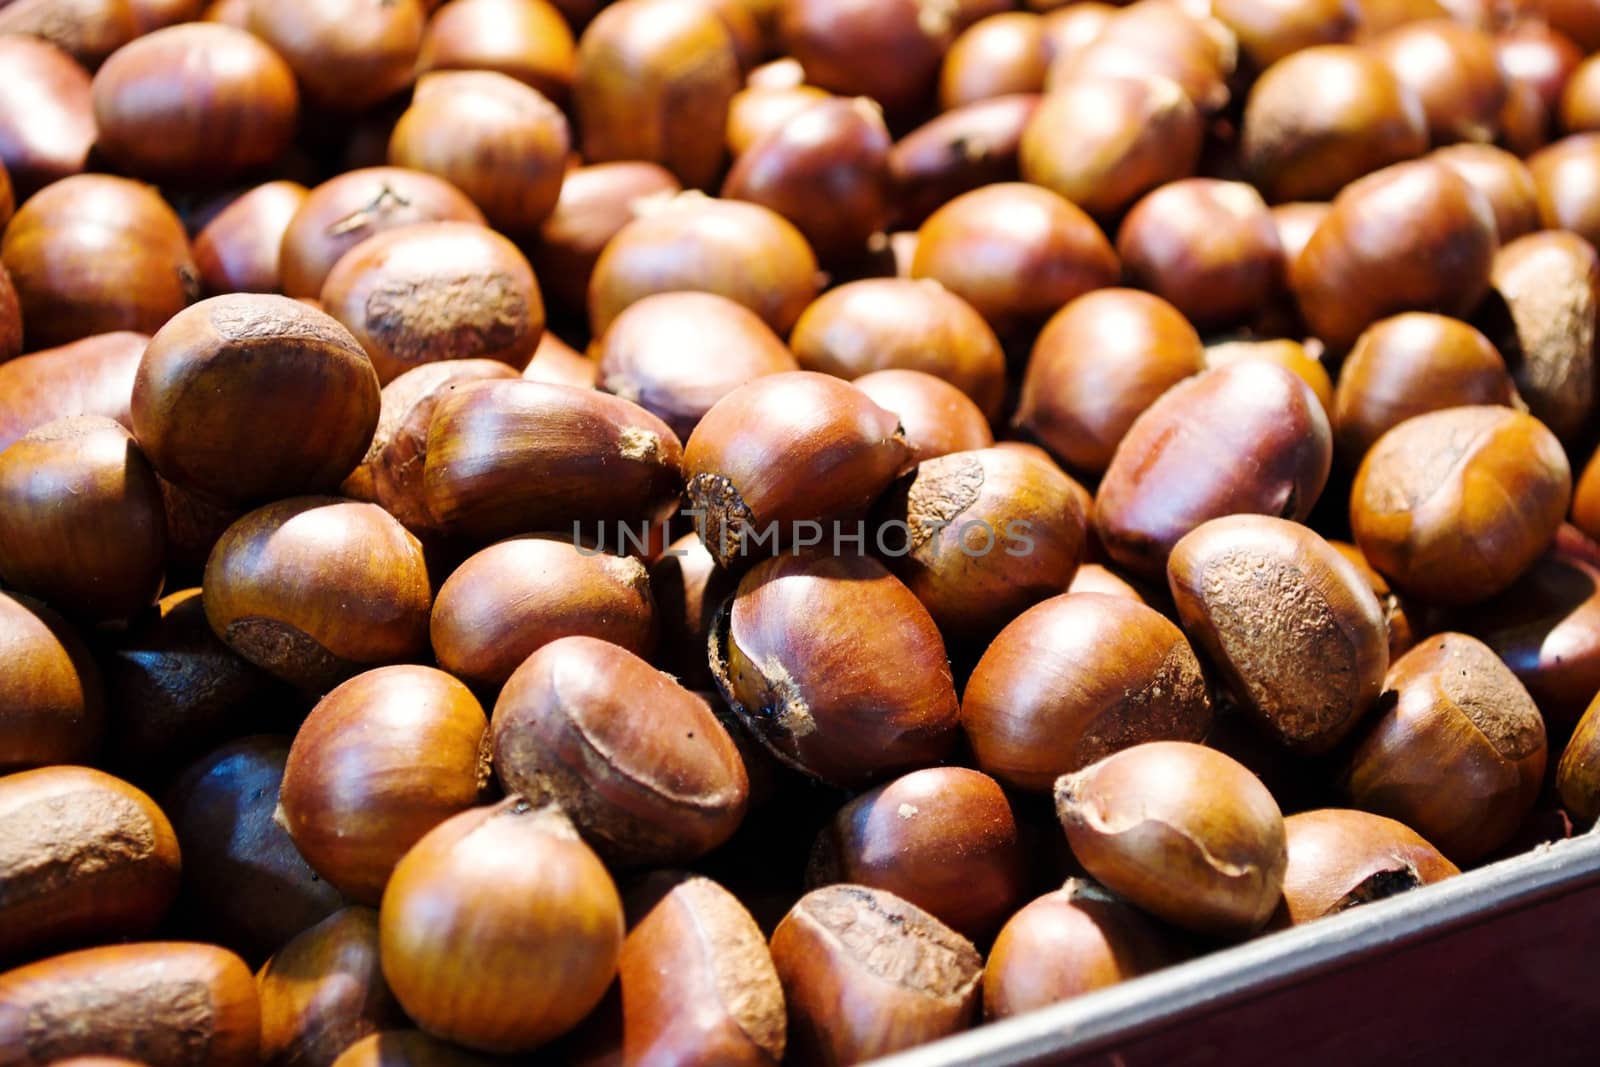 Chestnut was placed on the market.